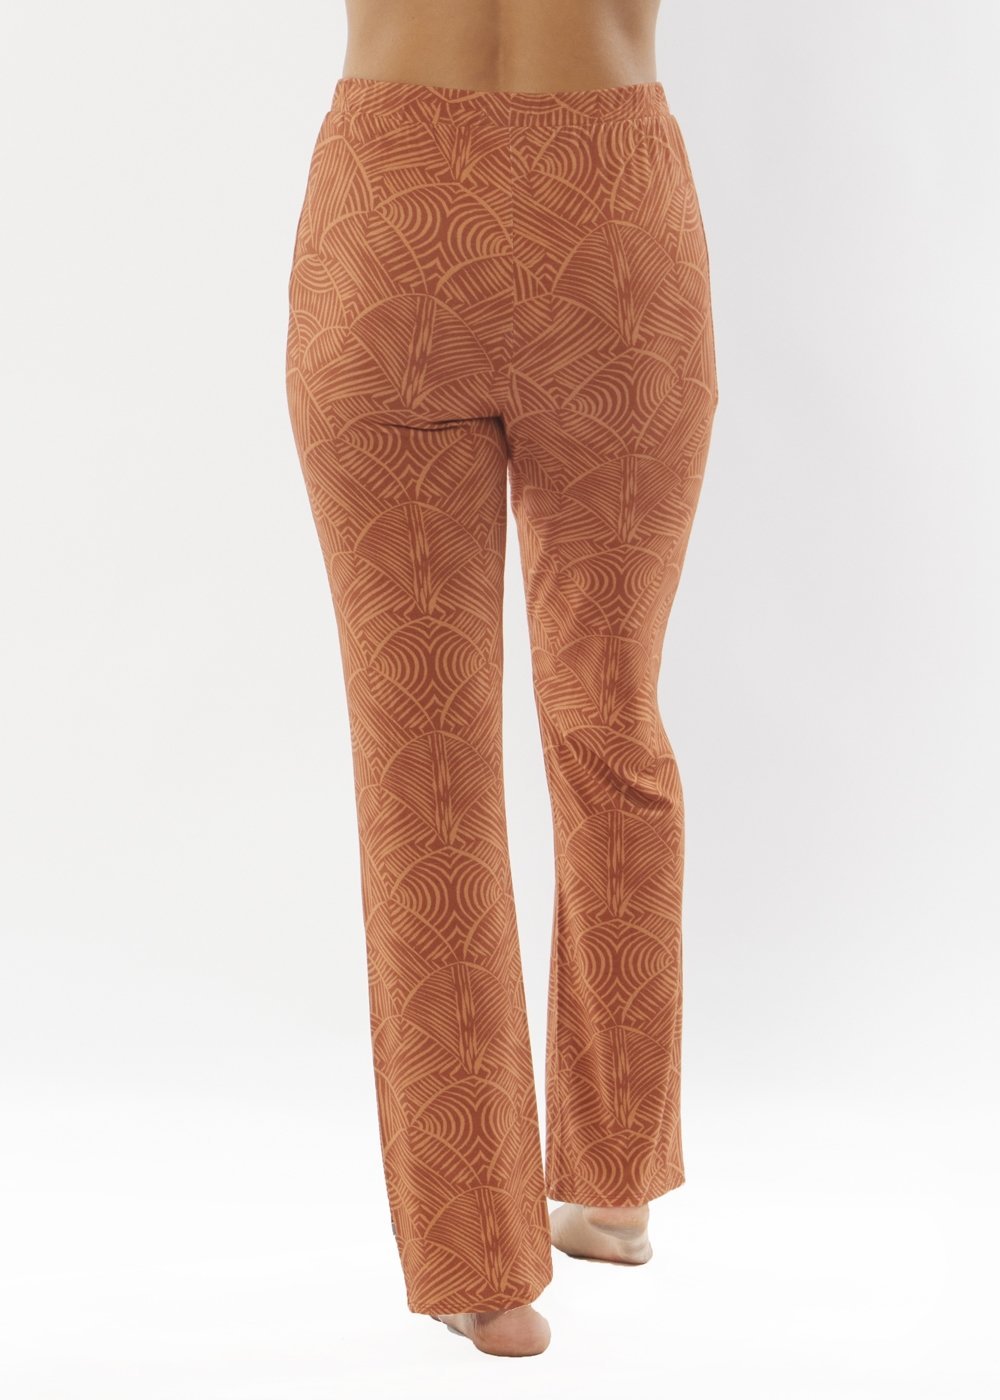 Between Wishes Knit Pant - Sisstrevolution